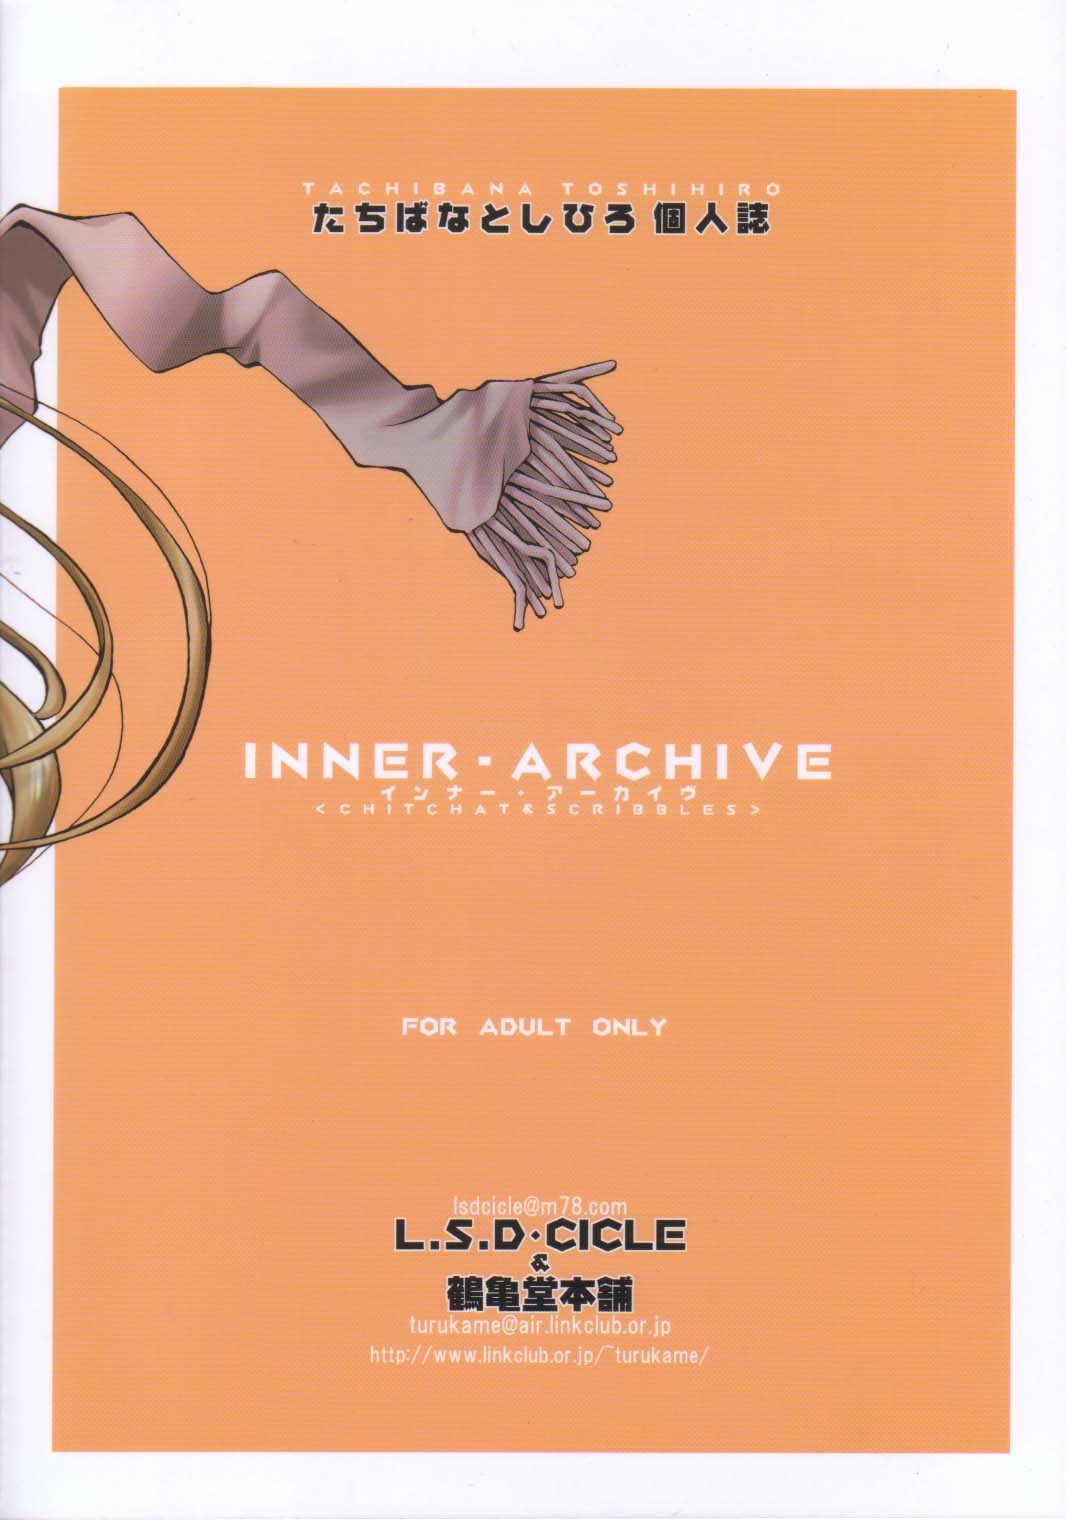 [L.S.D Cicle (Tachibana Toshihiro)] INNER ARCHIVE [L.S.D・CICLE (たちばな俊紘)] INNER・ARCHIVE